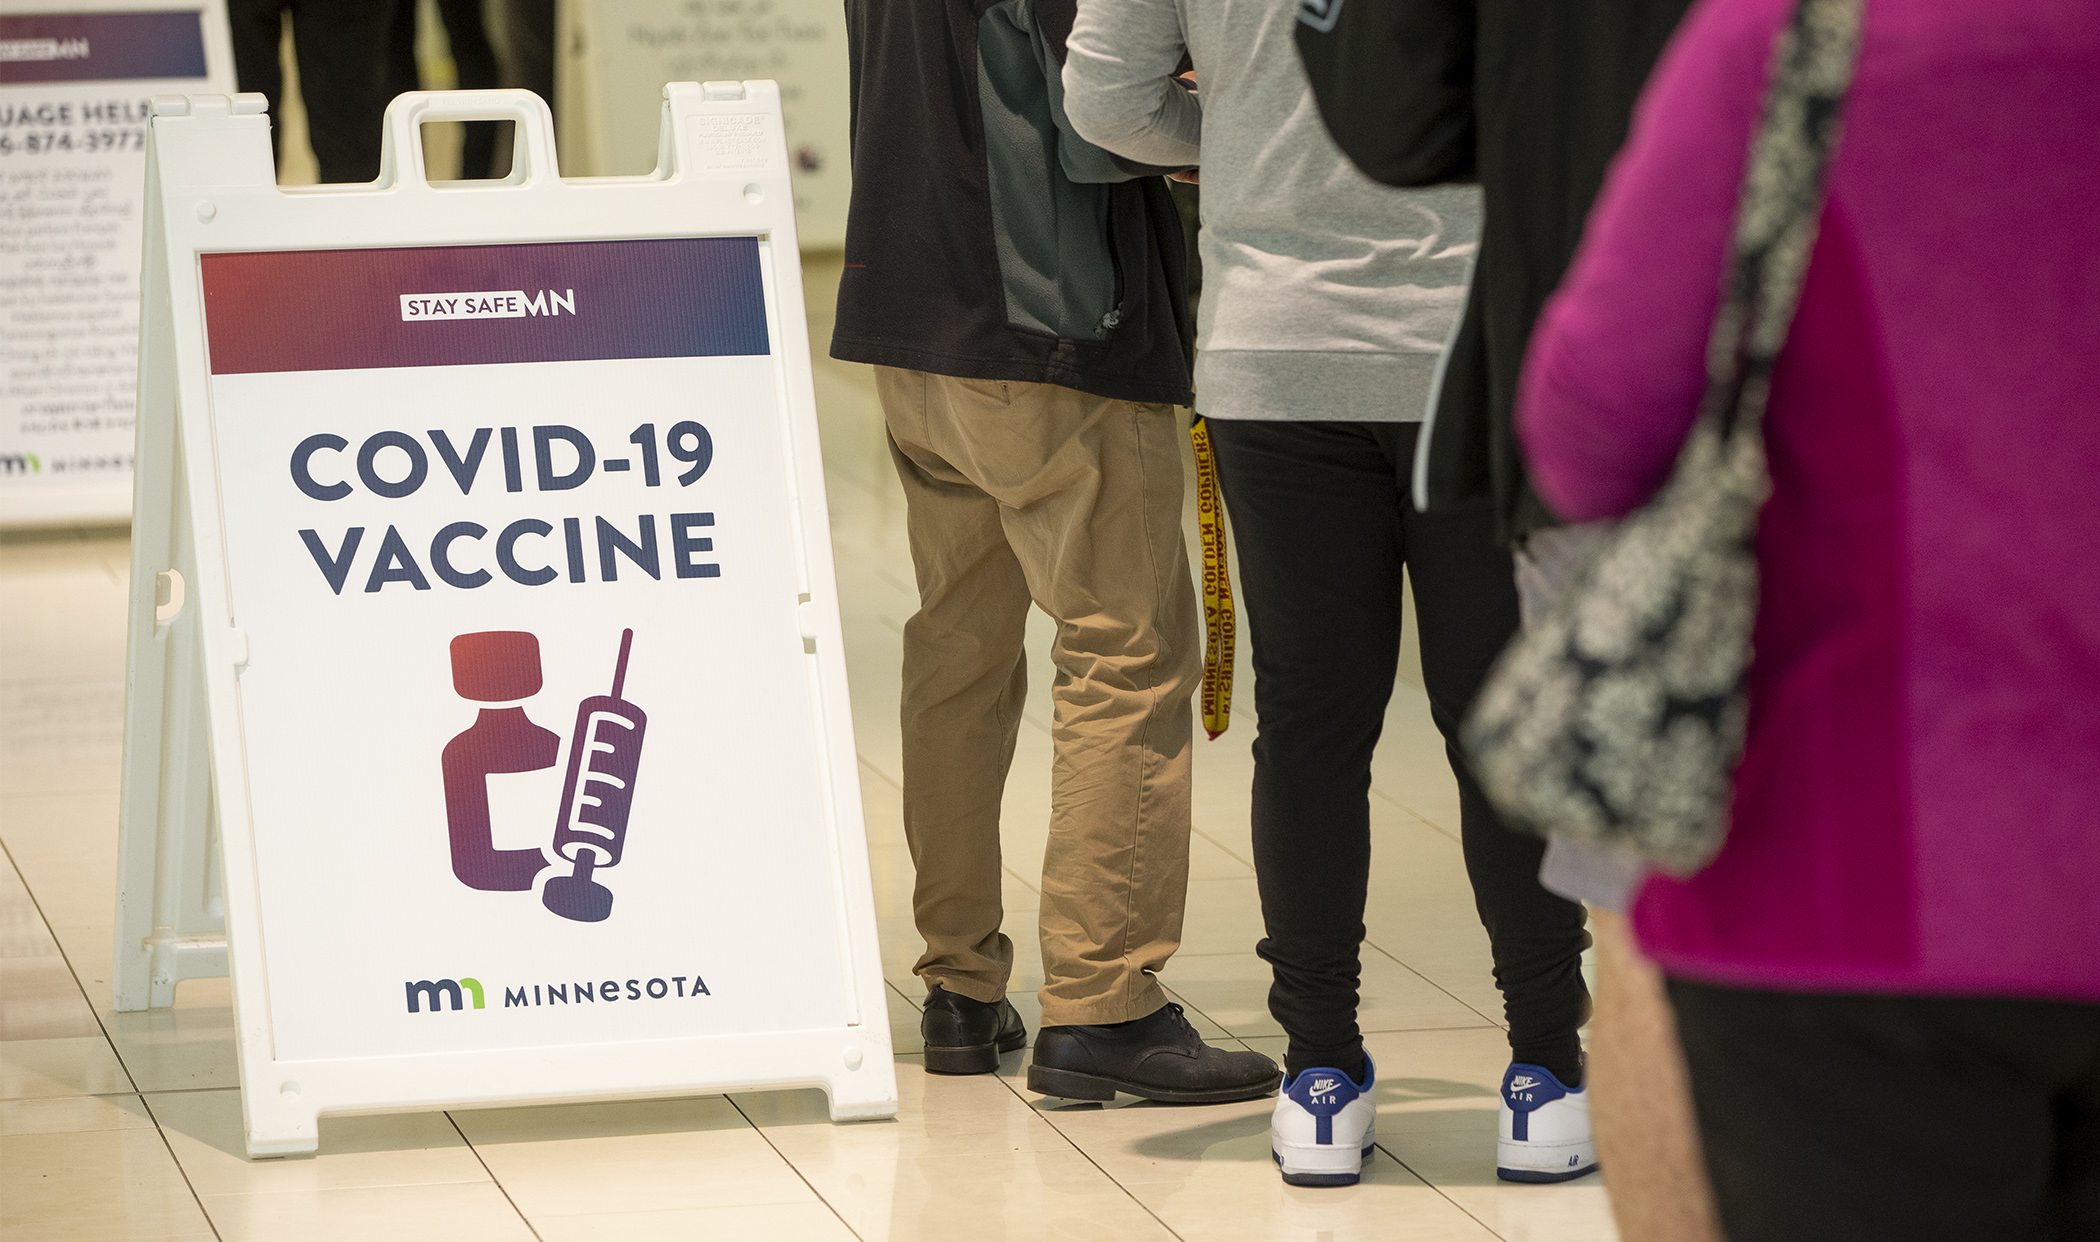 A COVID-19 vaccine site at the Mall of America in Bloomington, pictured last year. (Photo by Paul Battaglia)